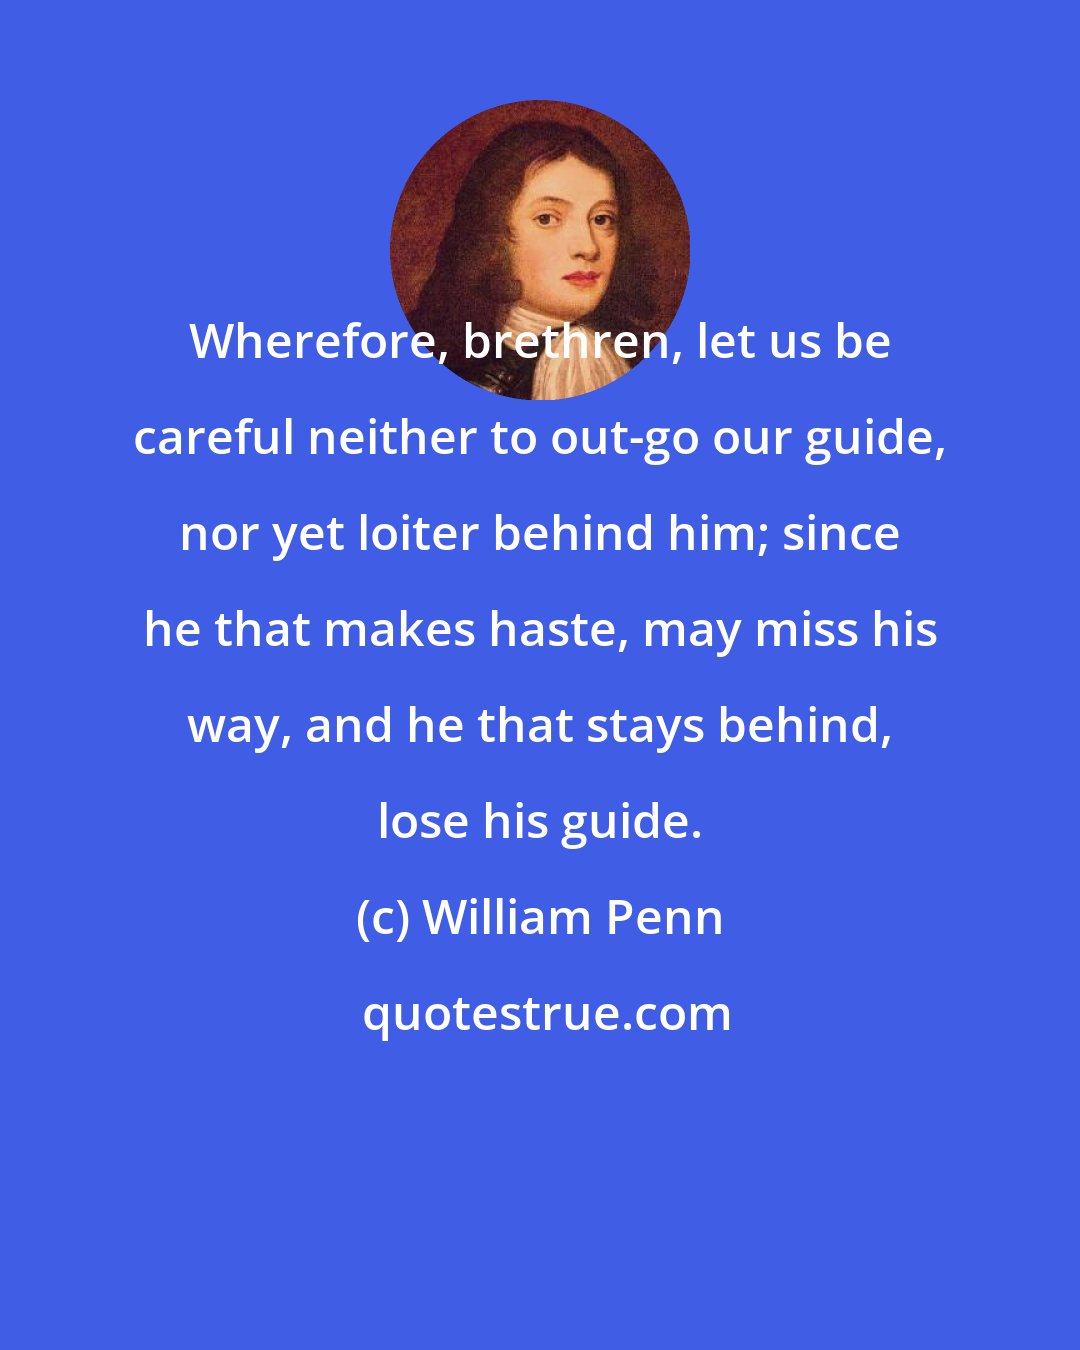 William Penn: Wherefore, brethren, let us be careful neither to out-go our guide, nor yet loiter behind him; since he that makes haste, may miss his way, and he that stays behind, lose his guide.